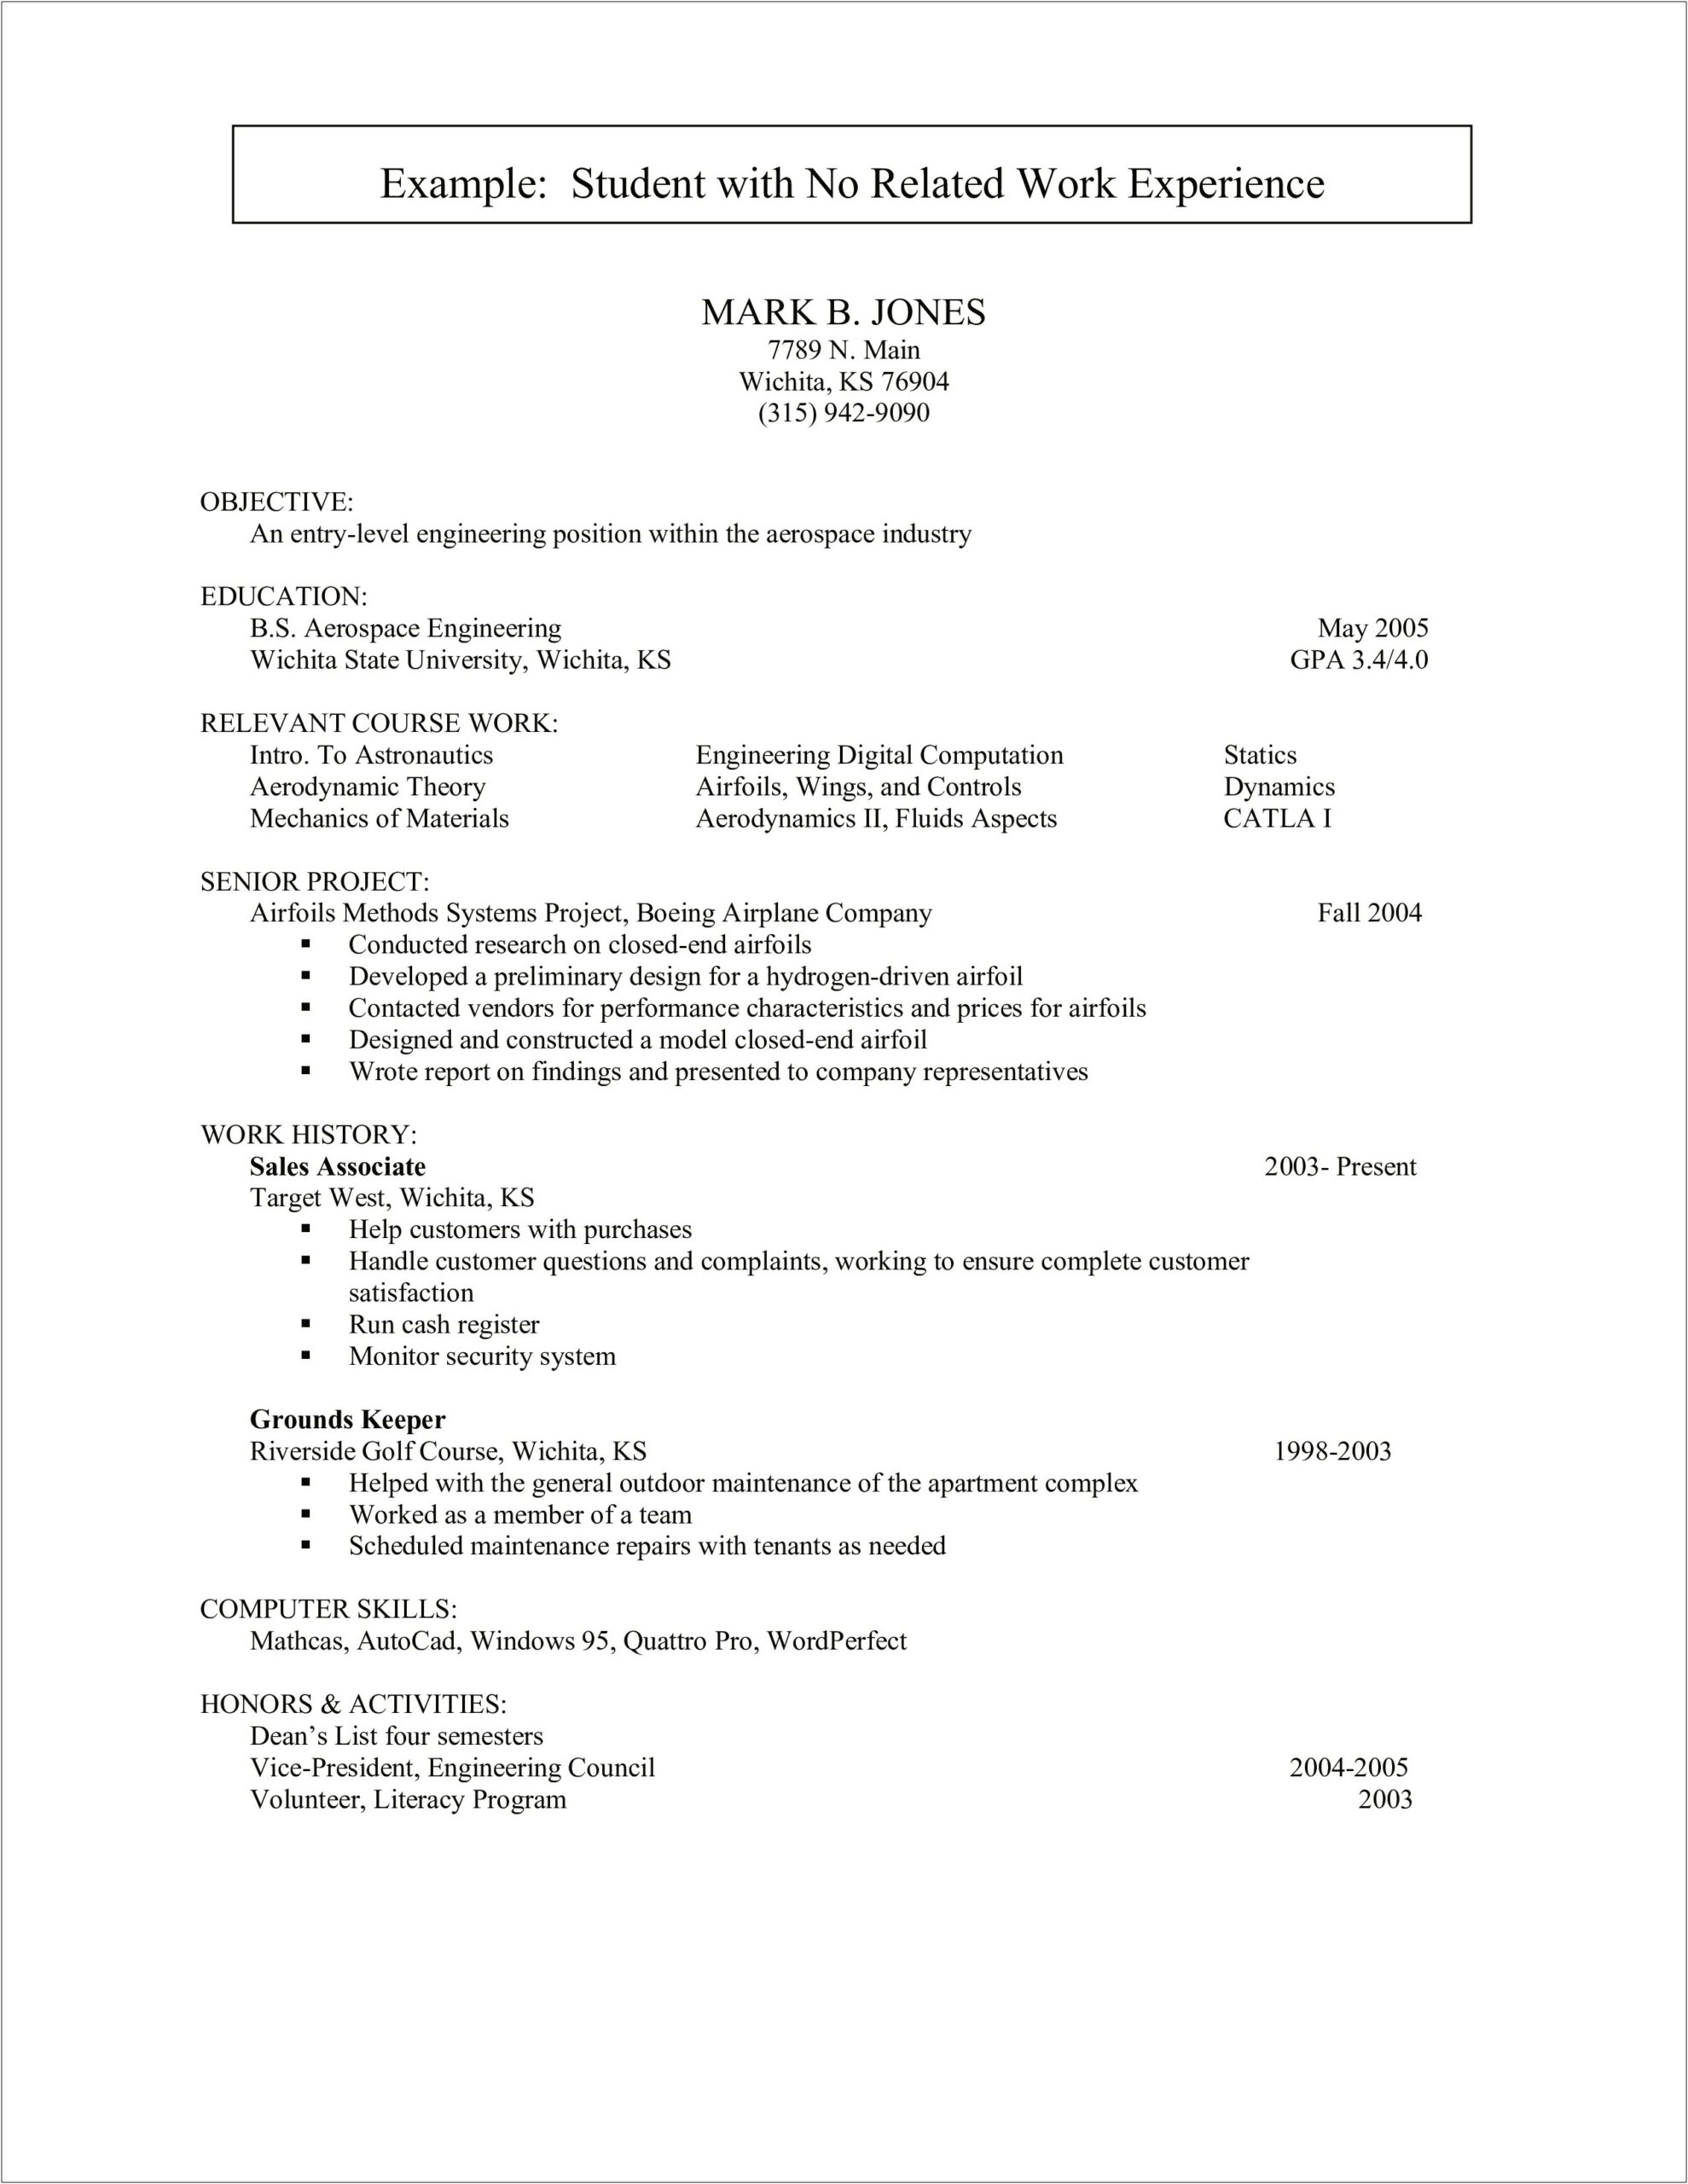 Resume Objective Examples No Work Experience